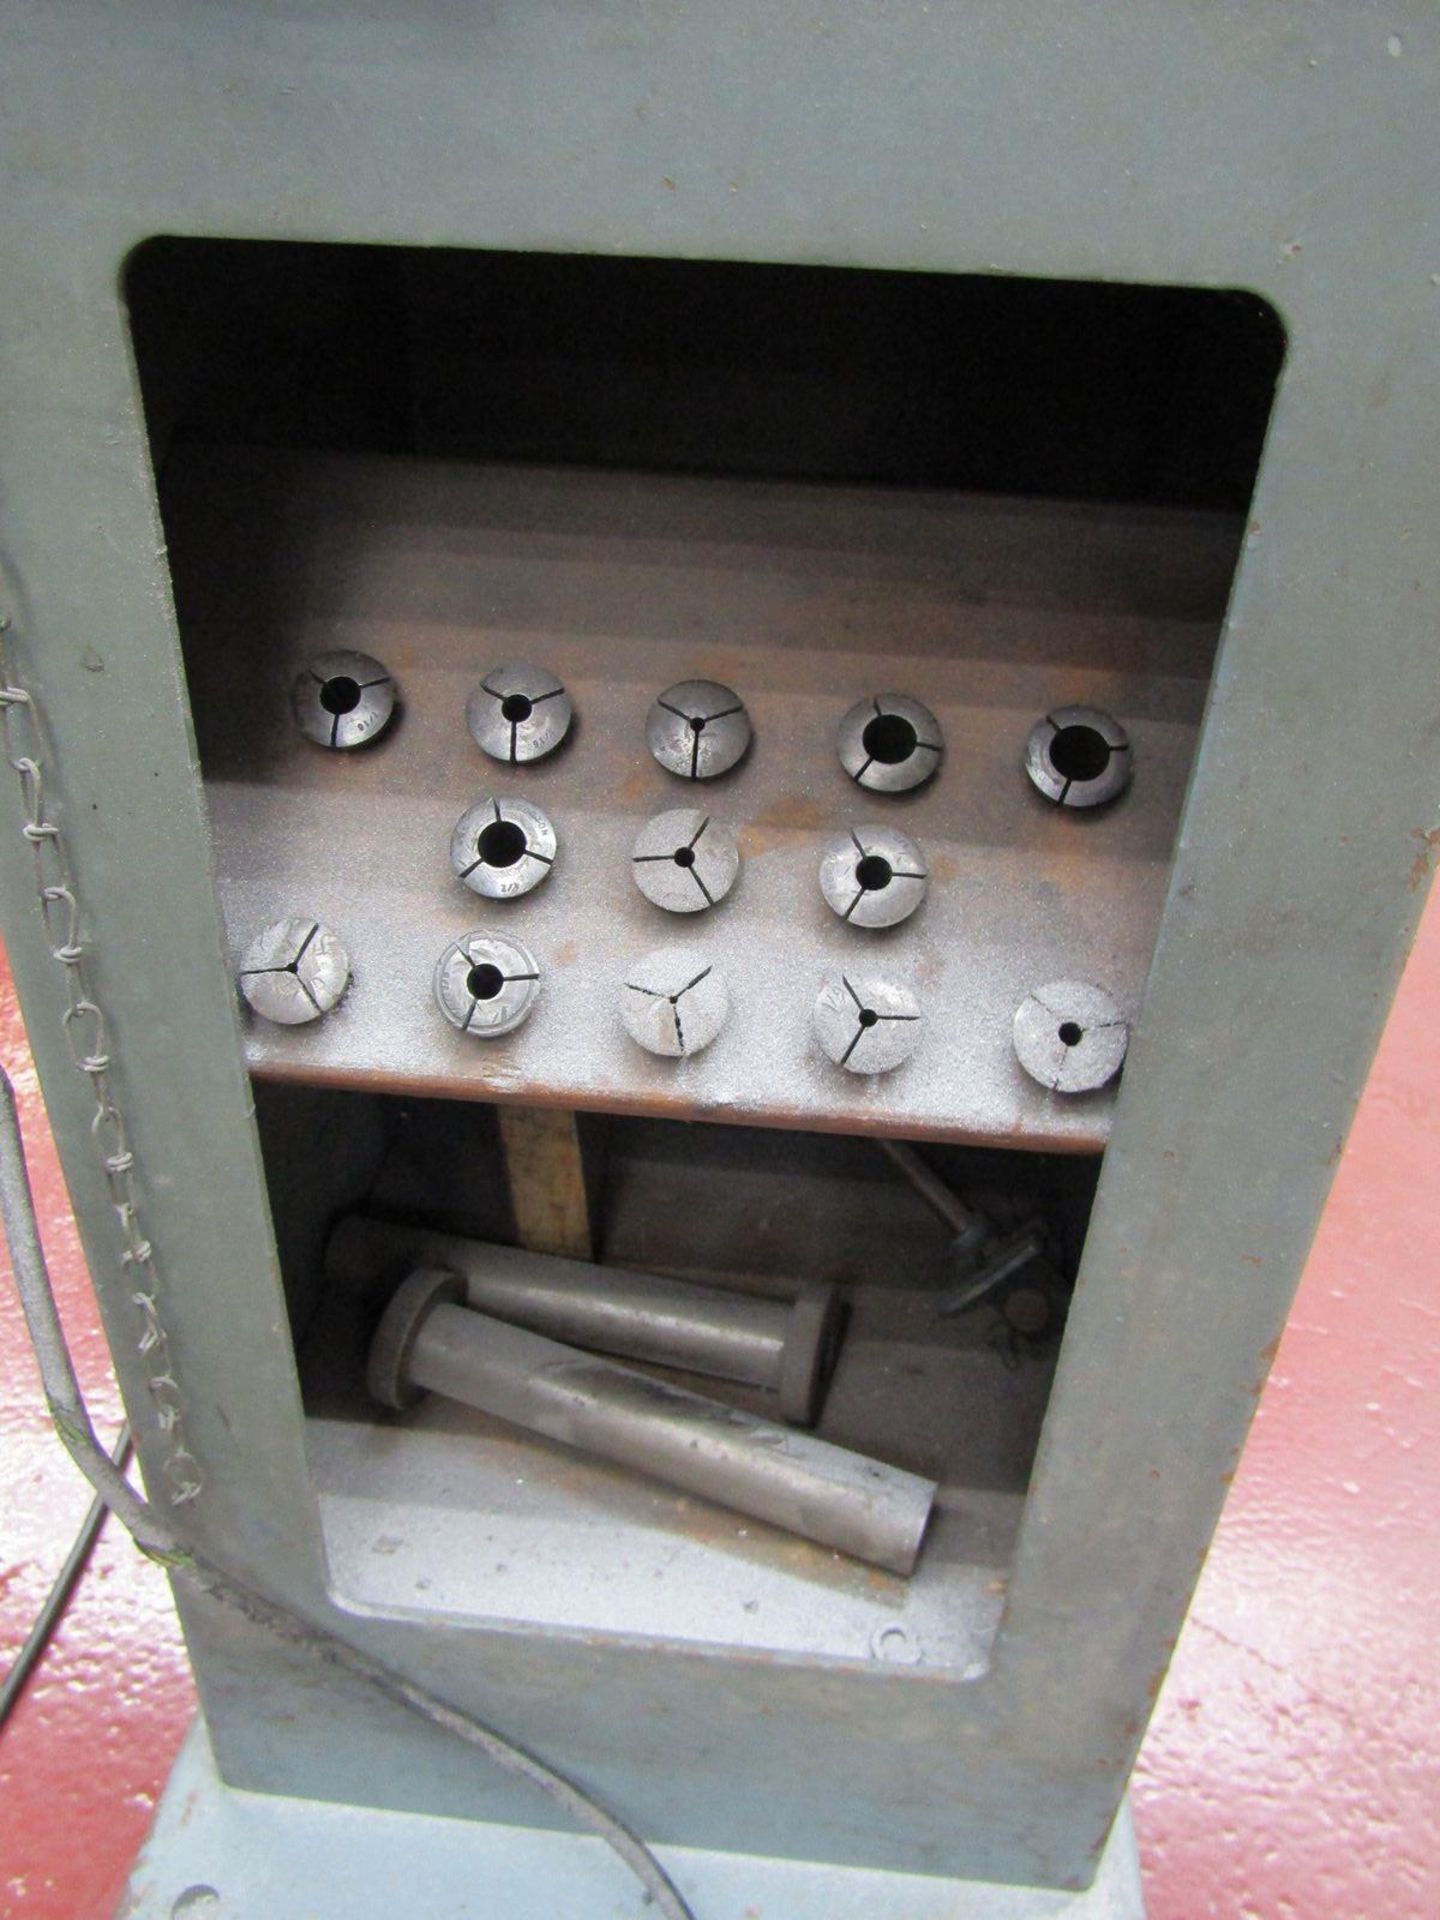 Lars Model 375-4 Cutter Grinder; with Available Collets (Ref. #: C-2256) - Image 4 of 4